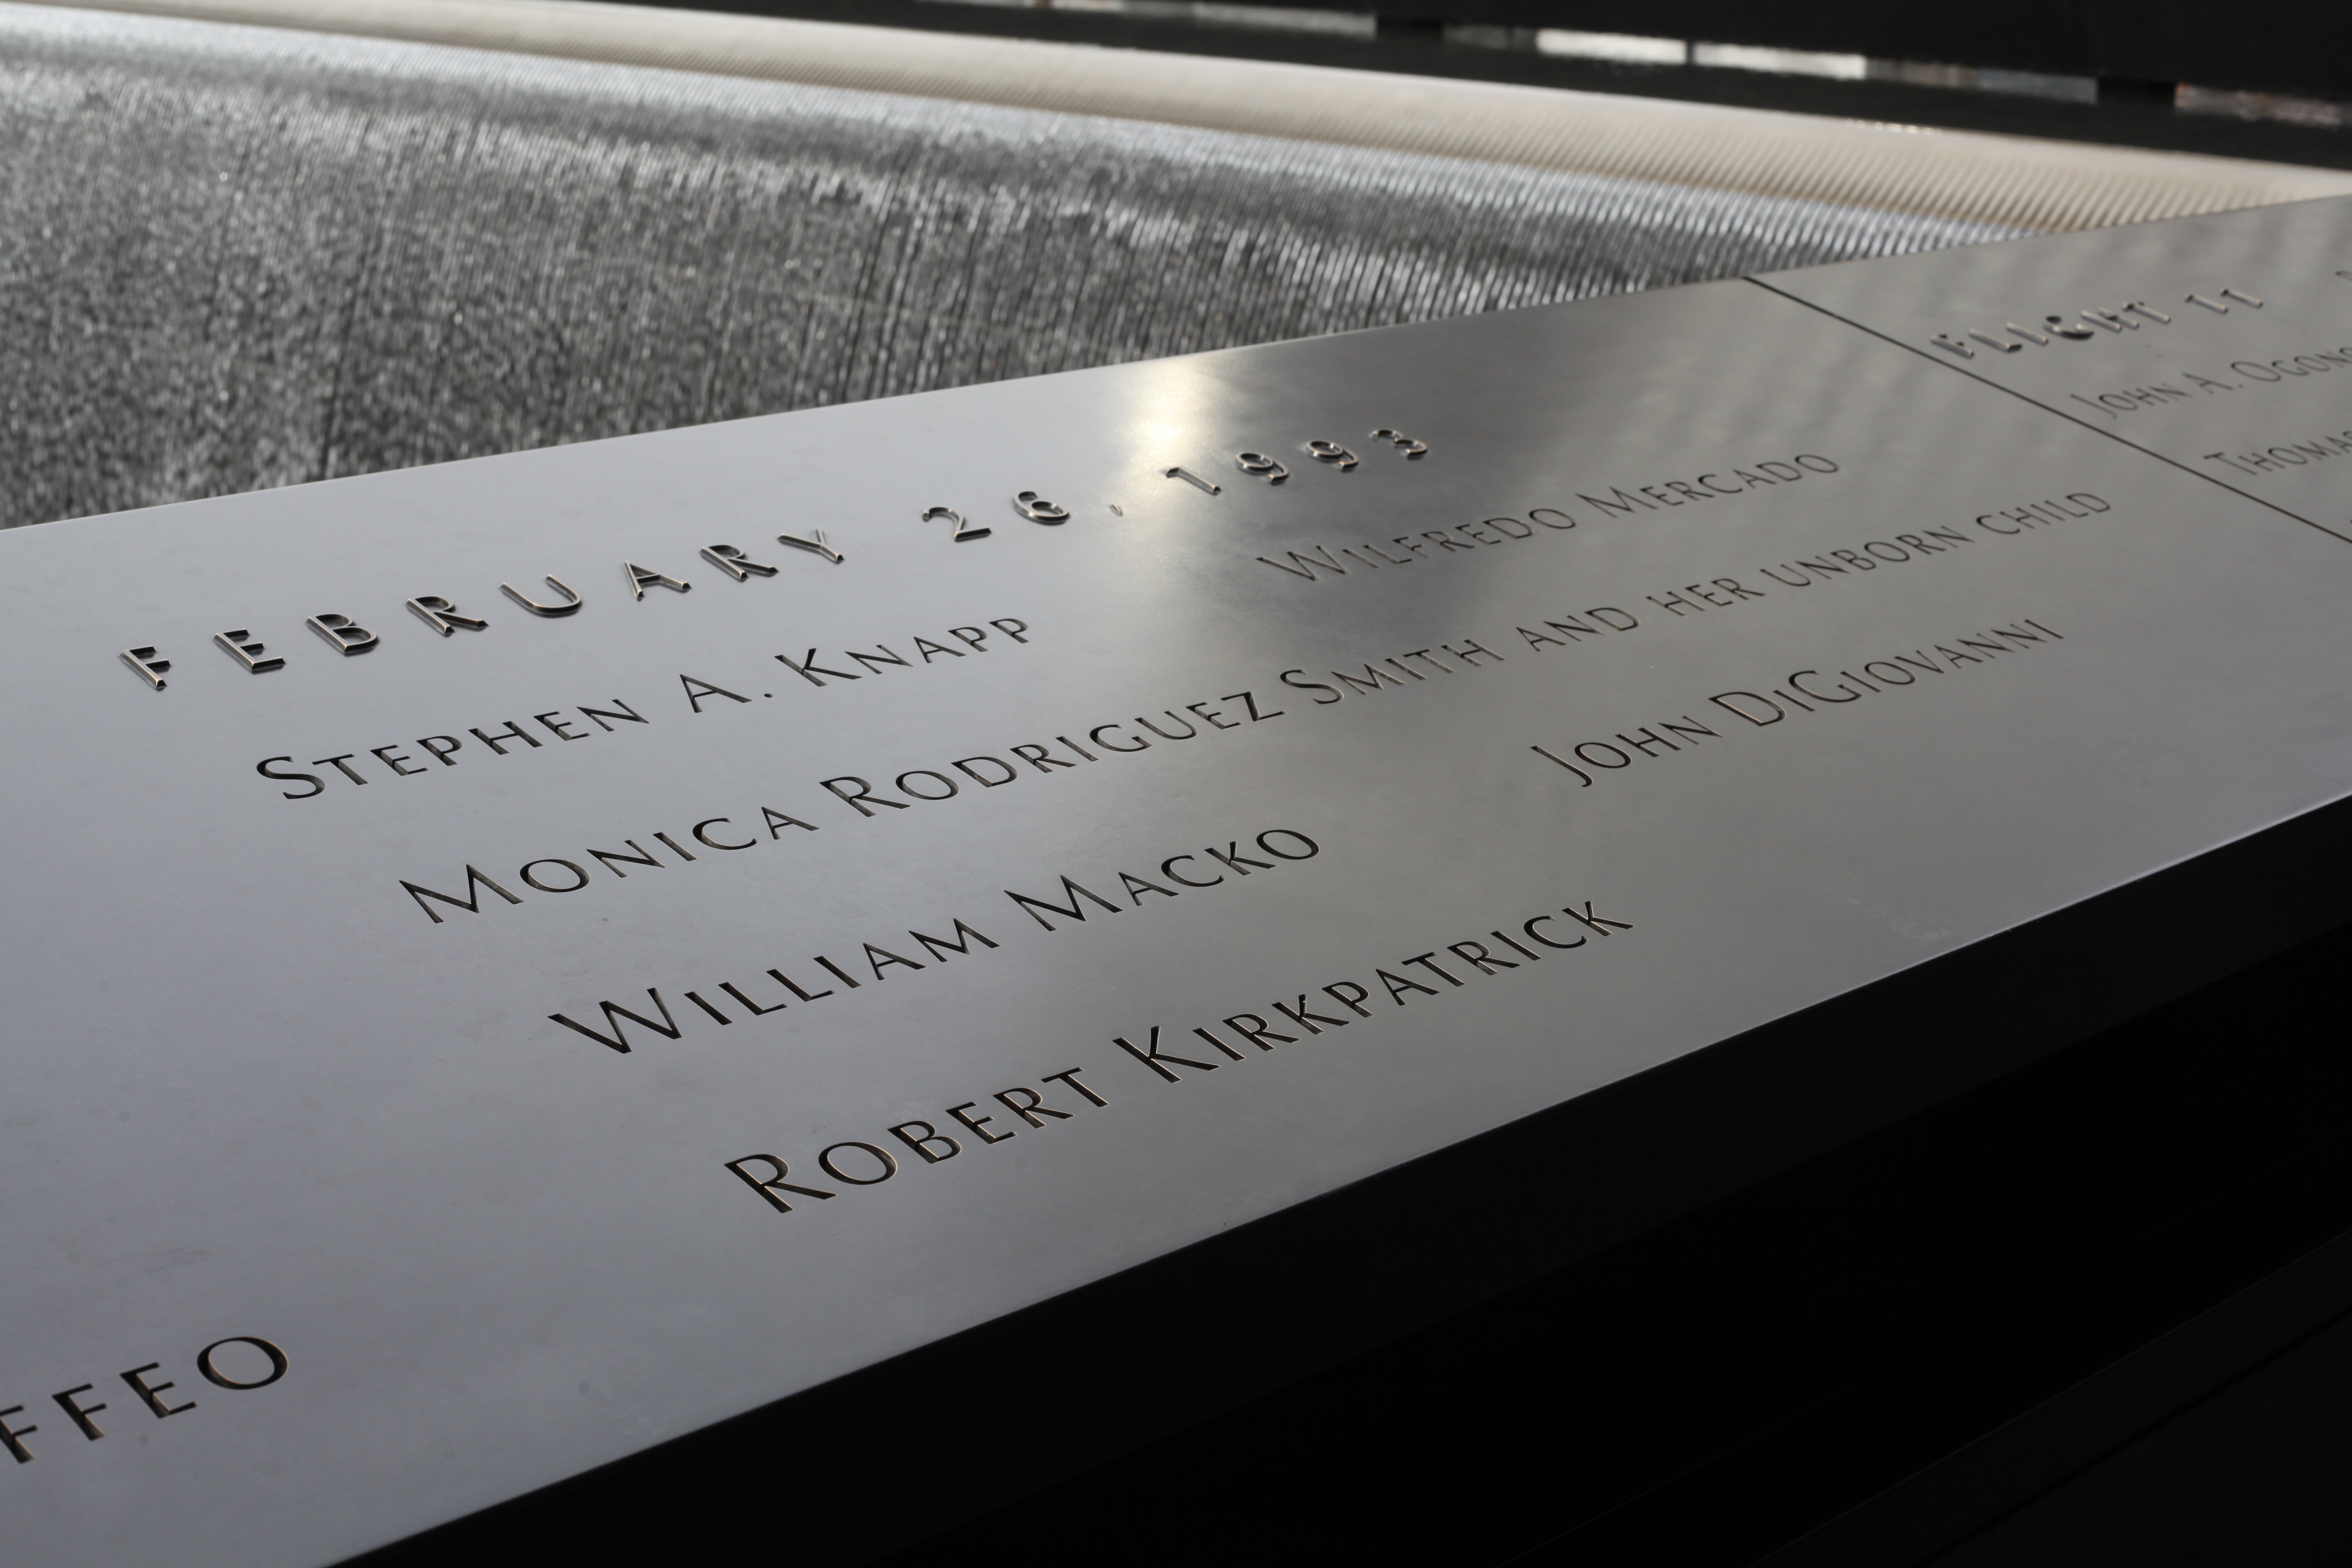 The names of the six victims of the 1993 bombing are seen on a bronze parapet beside a reflecting pool on the 9/11 Memorial.